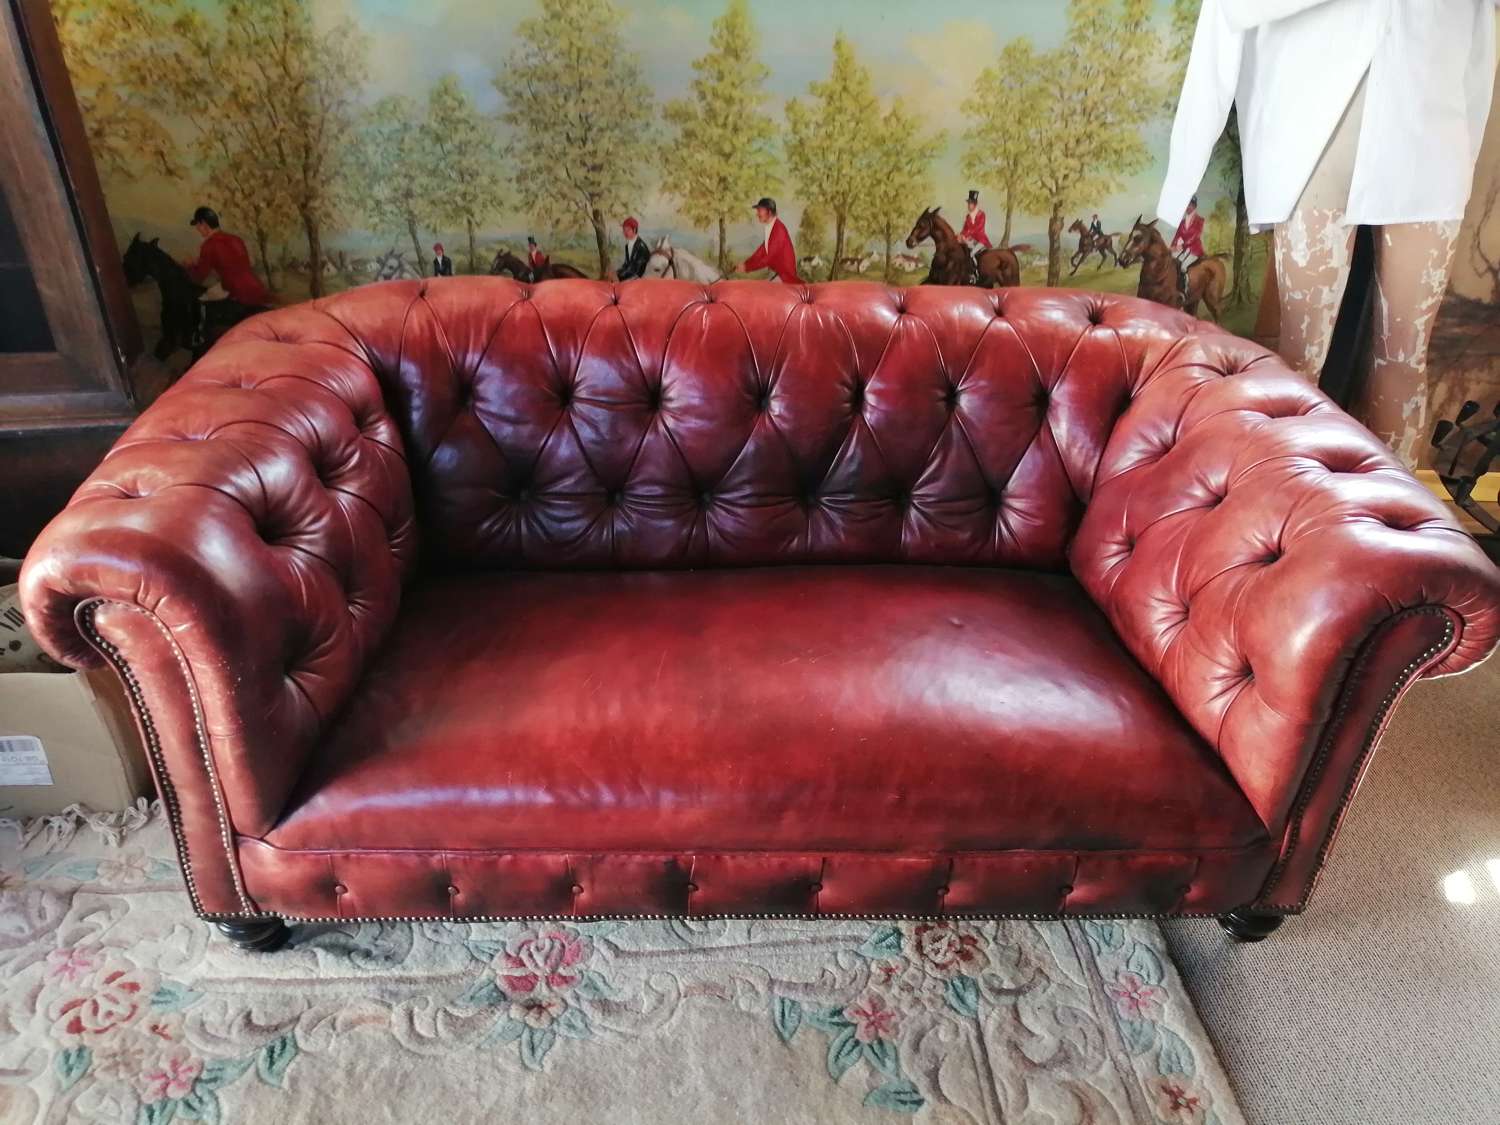 A 19th century red leather Chesterfield sofa